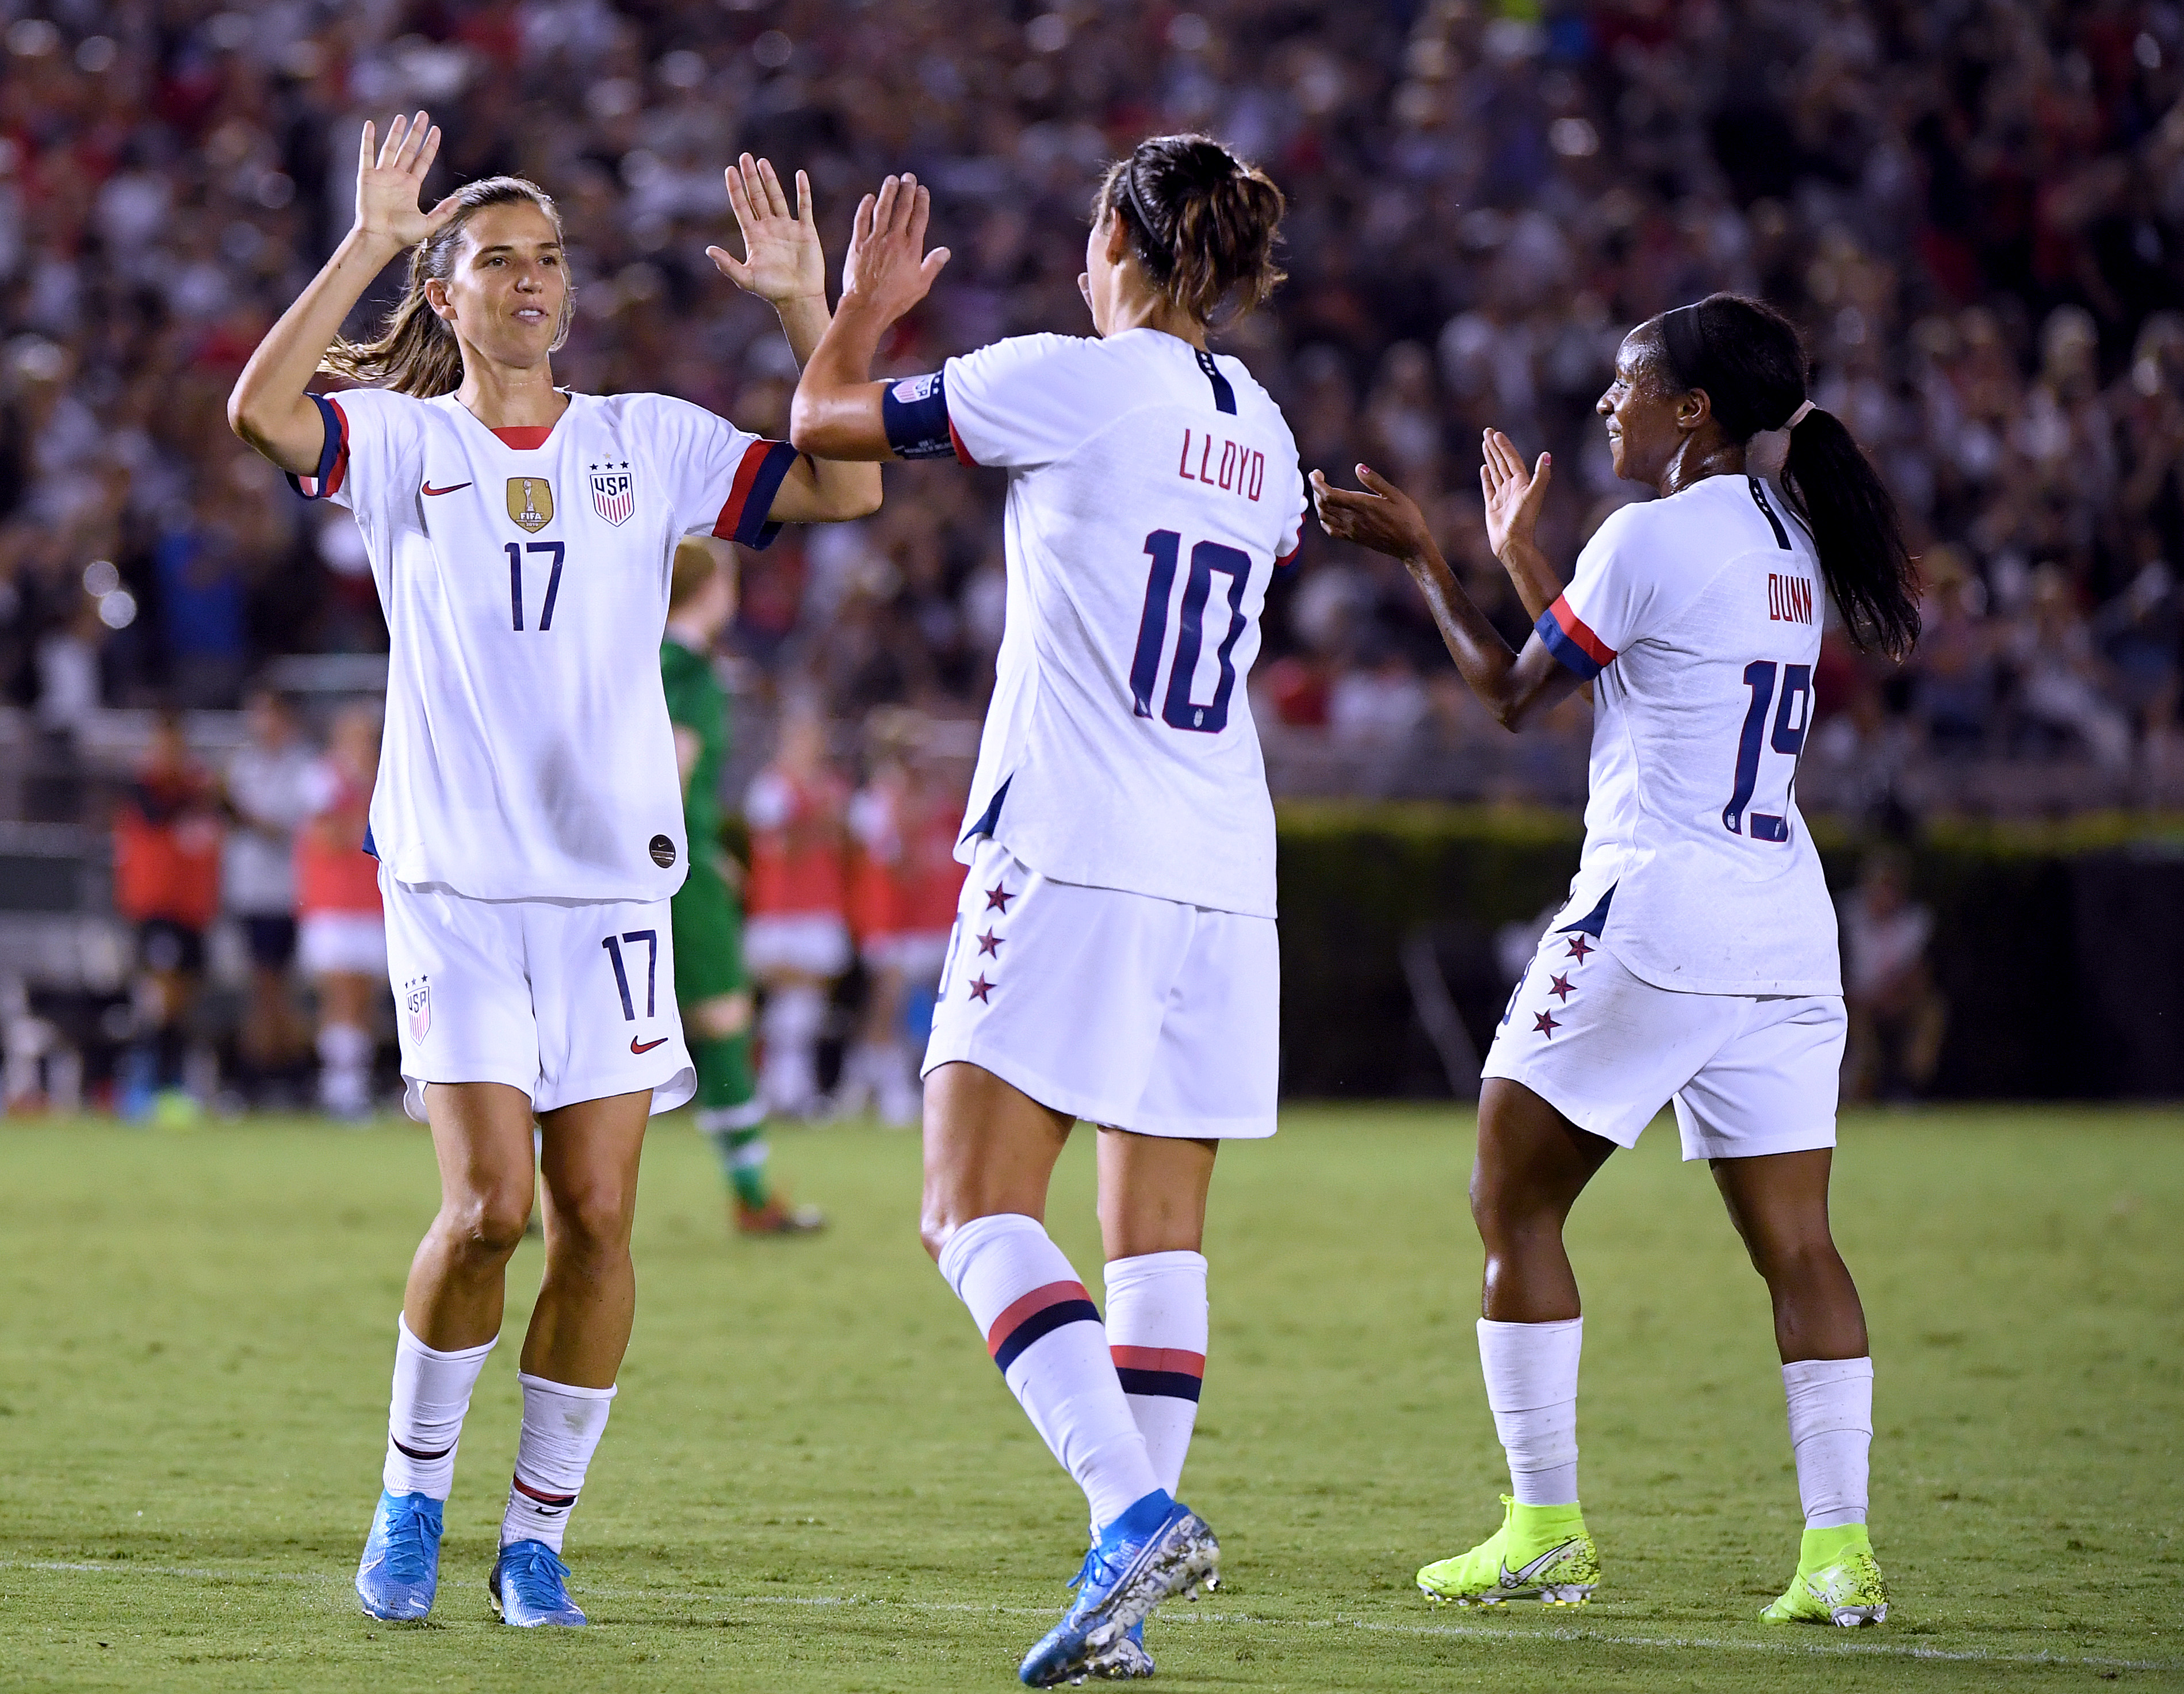 Carli Lloyd #10 of the United States celebrates her goal with Tobin Heath #17 and Crystal Dunn #19, to take a 3-0 lead over the Republic of Ireland, during the first half of the first game of the USWNT Victory Tour at Rose Bowl on August 03, 2019 in Pasadena, California. (Harry How—Getty Images)